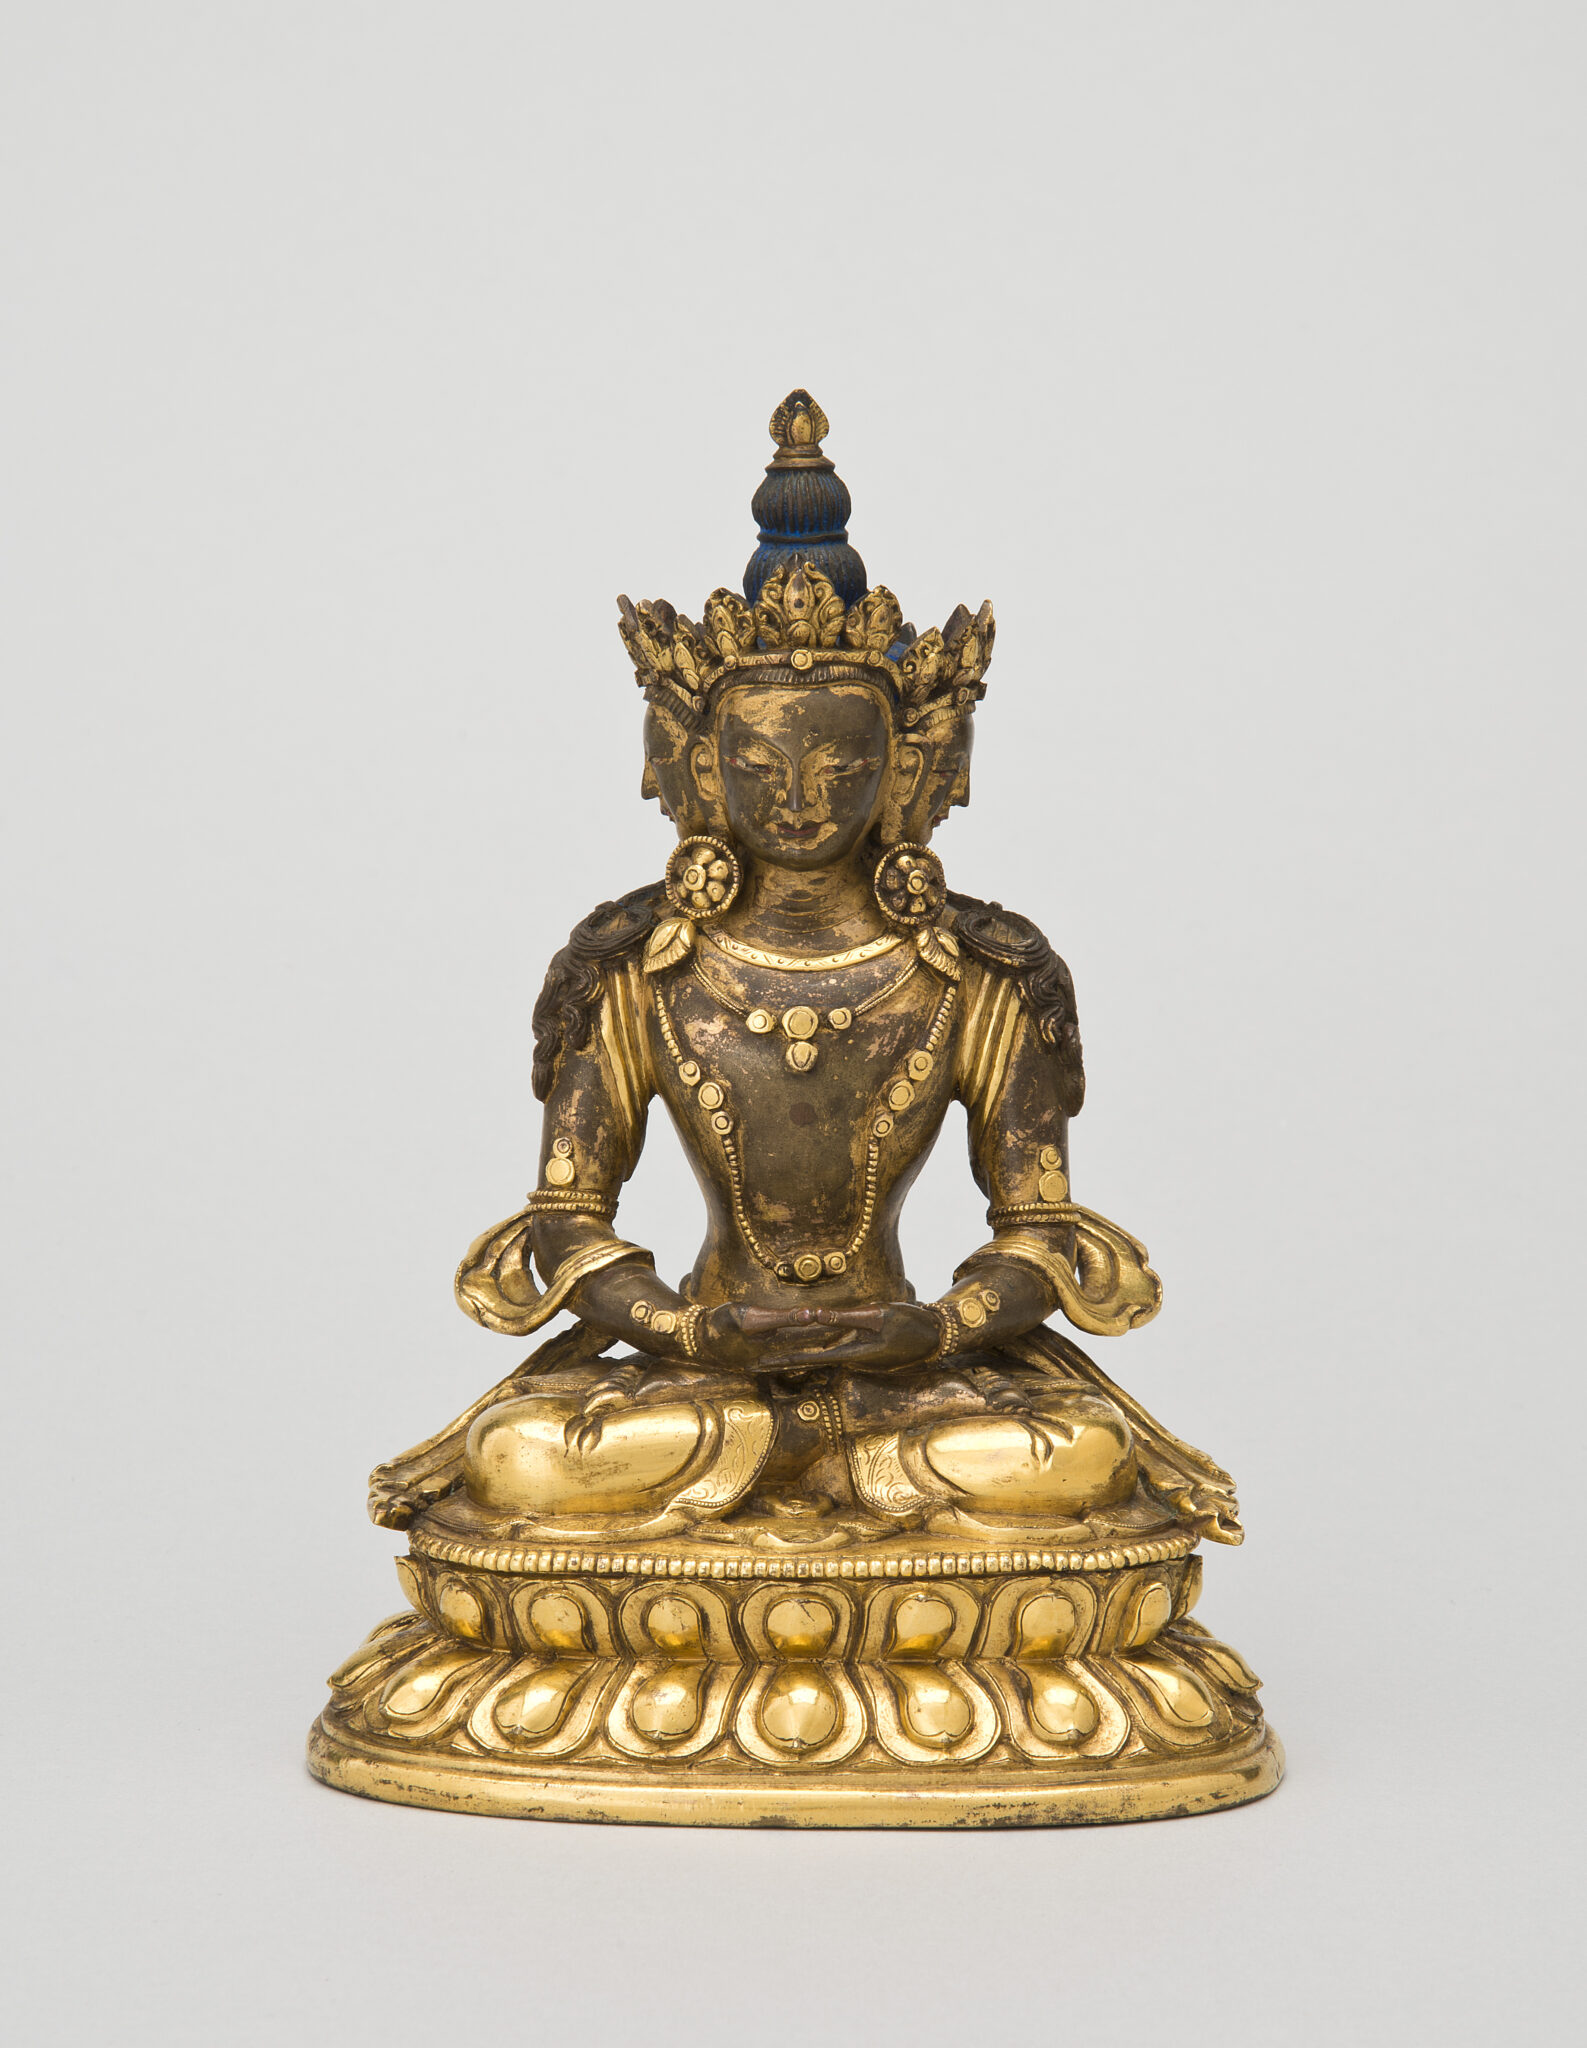 Patinated golden sculpture depicting Buddha wearing pointed crown and tall hairstyle seated in meditation